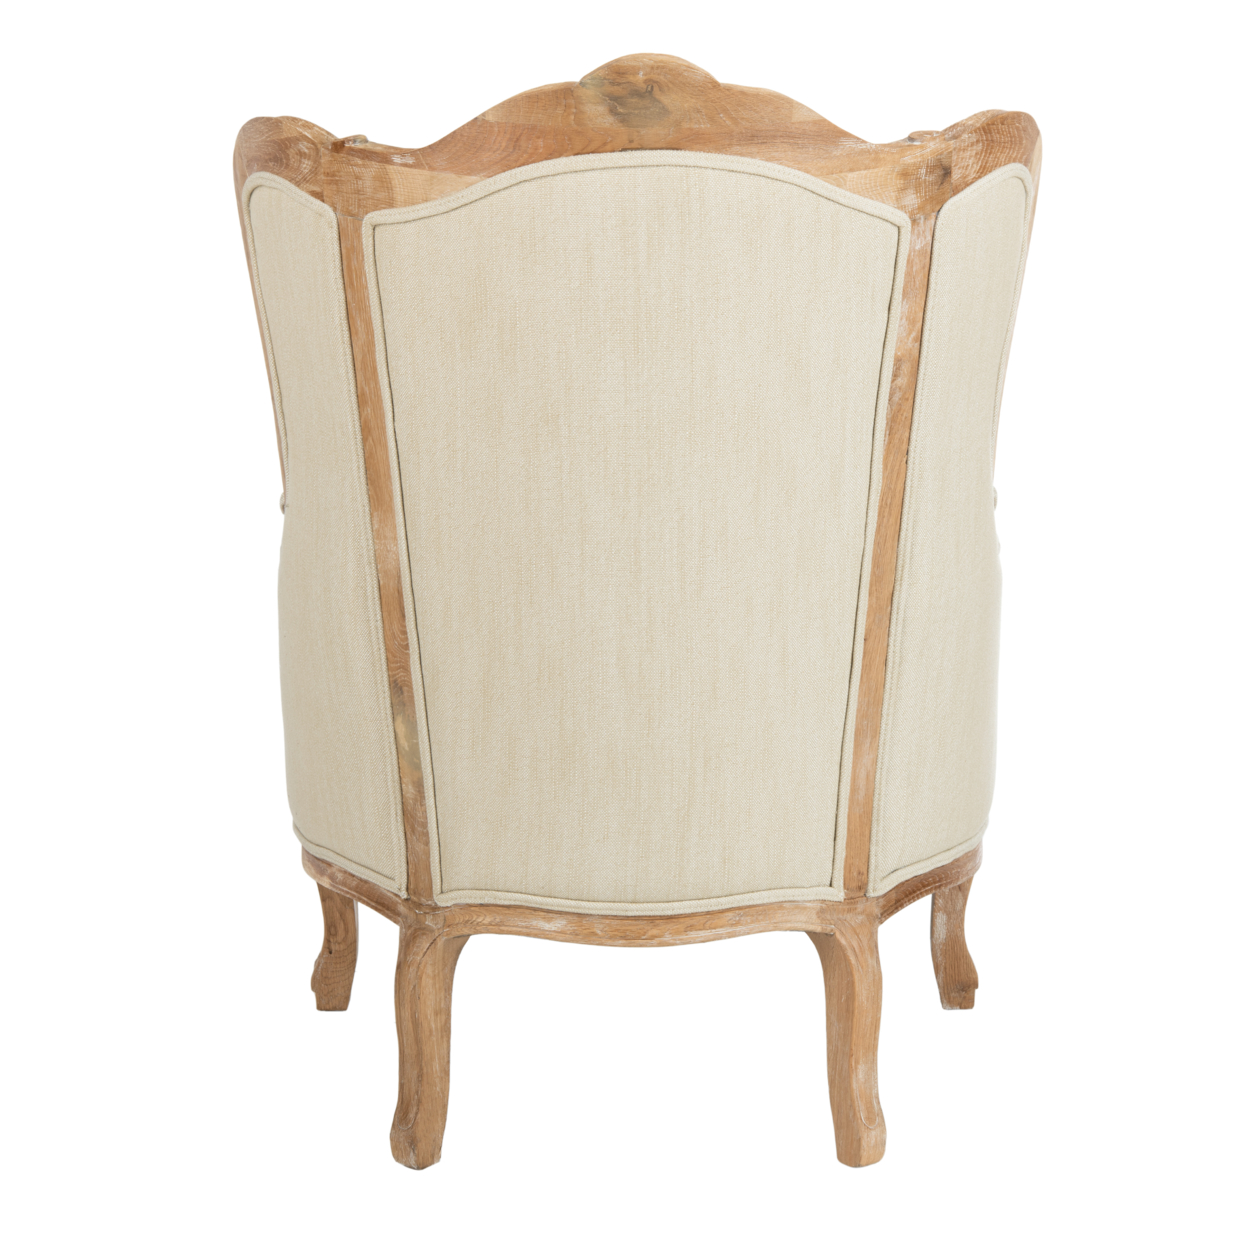 SAFAVIEH COUTURE Fallon Wing Chair Beige